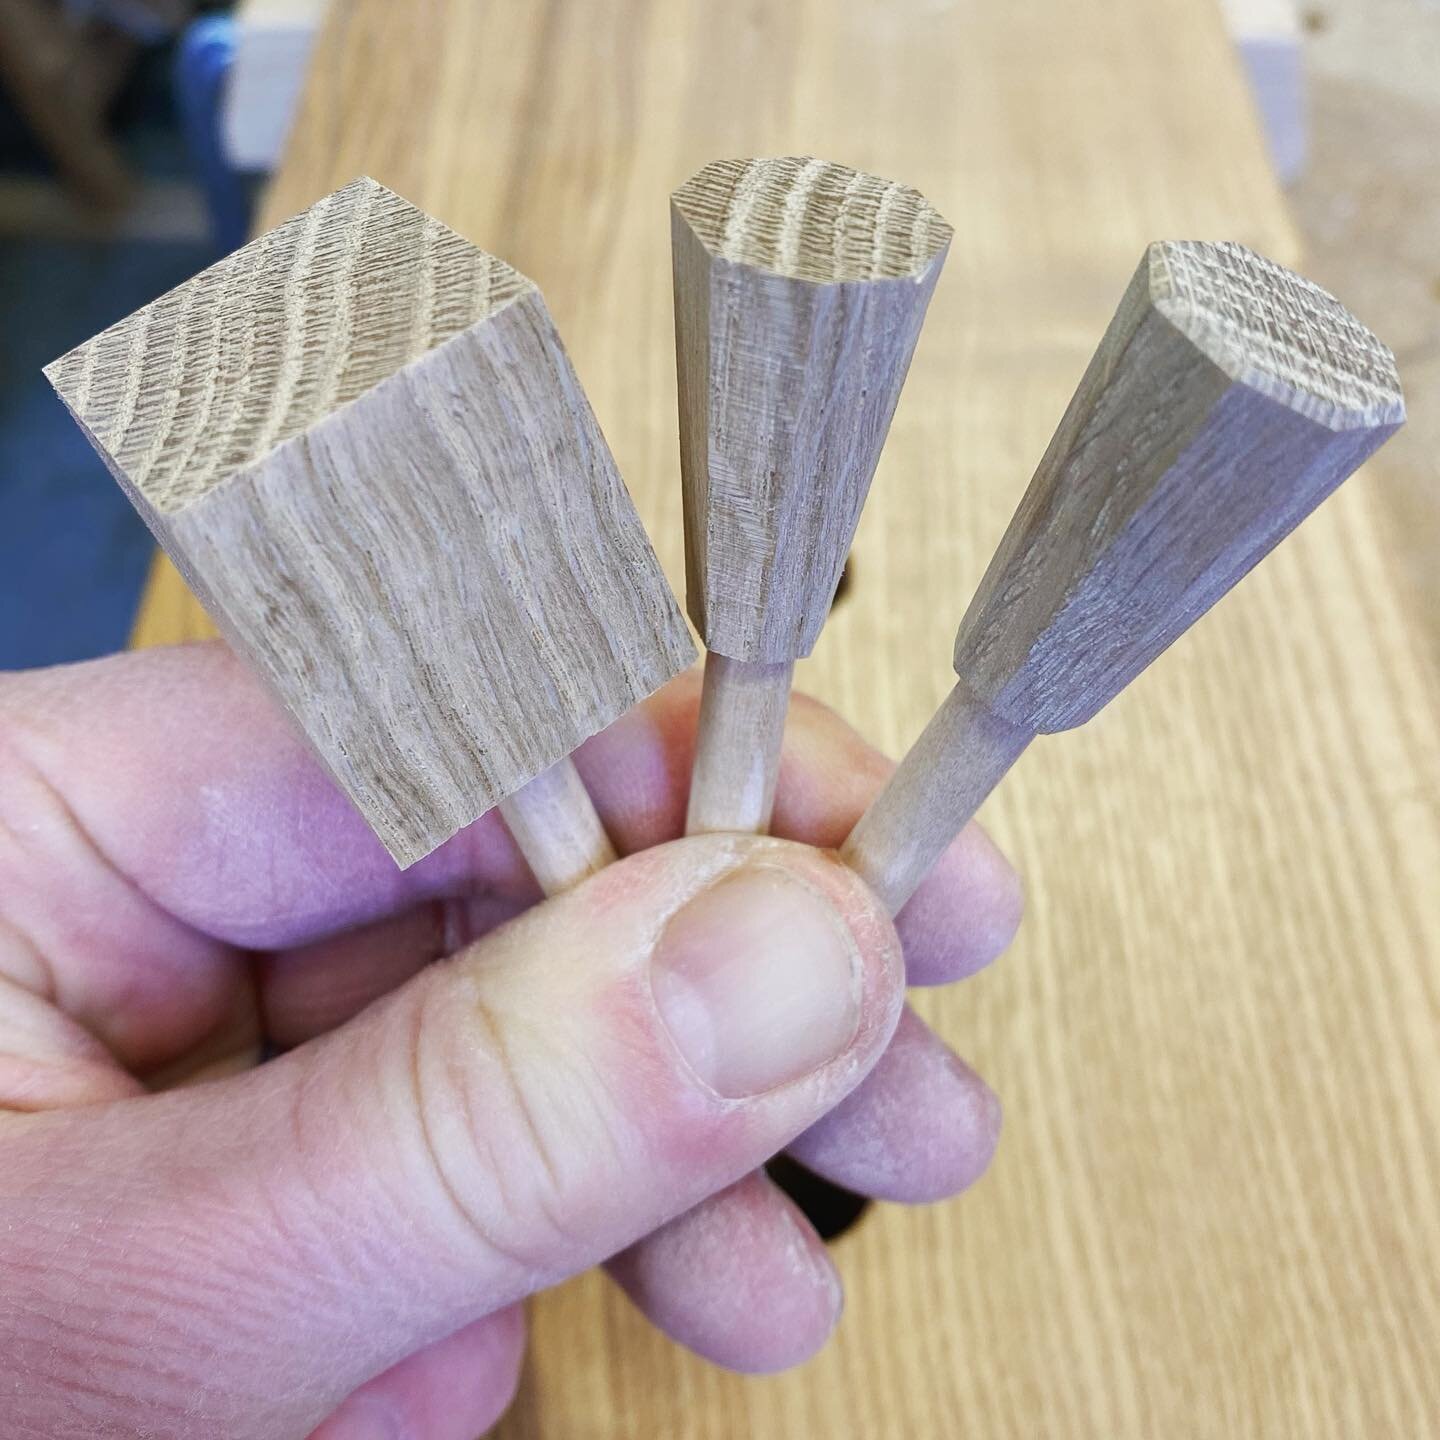 Oak lollipop anyone? Making a small drawer pull - starting blank, rough bandsawn shape, final detail sand (L to R). Thinking of fuming the finished piece for extra contrast&hellip; 
#sfmamembers #scottishfurnituremakersassociation #woodwork #woodwork